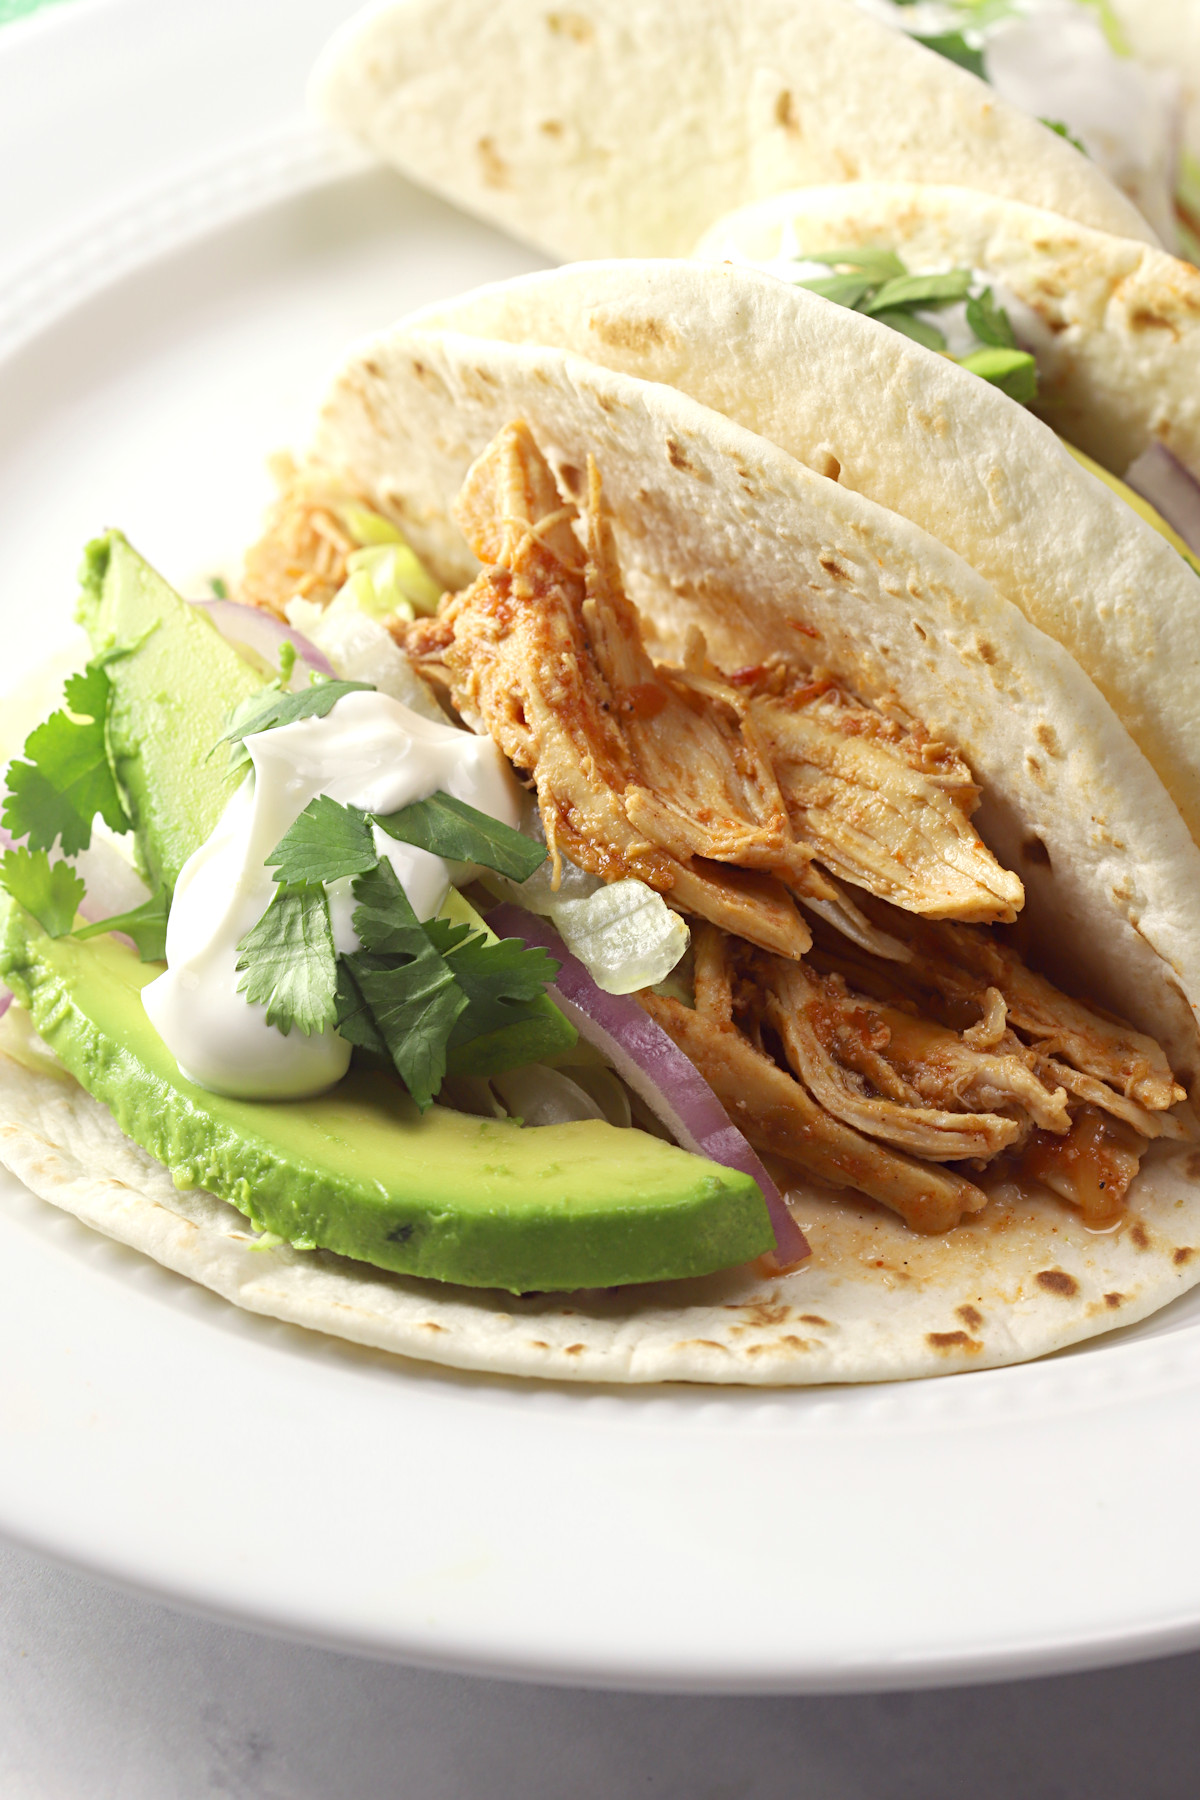 Flour tortilla filled with shredded chicken and taco toppings.